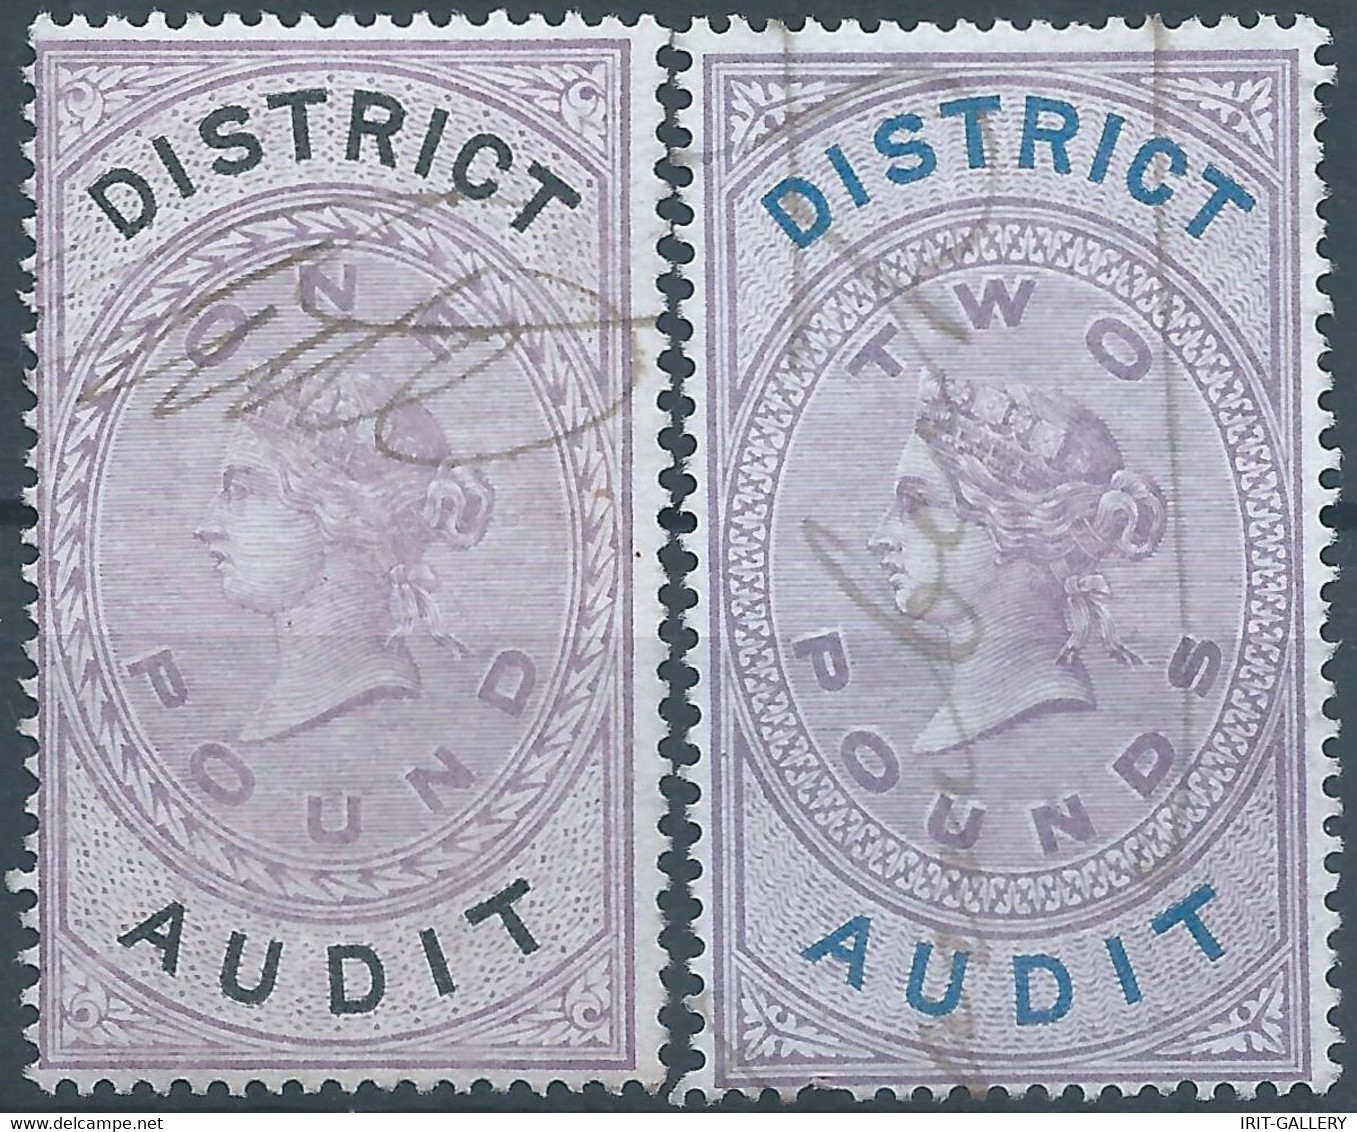 Great Britain-ENGLAND,Queen Victoria,1880-1900 Revenue Stamp Tax Fisca DISTRICT AUDIT,1&2 Pounds,Used - Fiscale Zegels